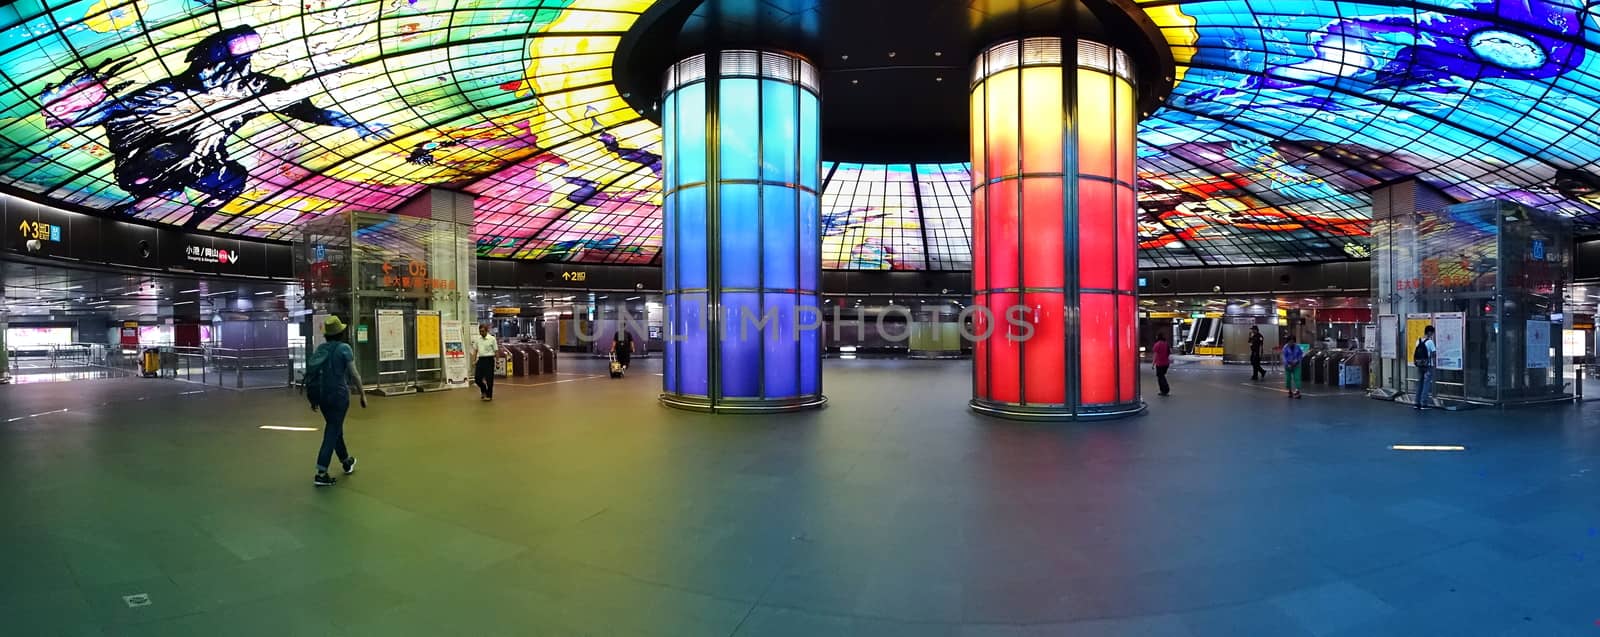 KAOHSIUNG, TAIWAN -- SEPTEMBER 13, 2018: The concourse of the Formosa Boulevard Station of the Kaohsiung MRT features a large public art glass installation.